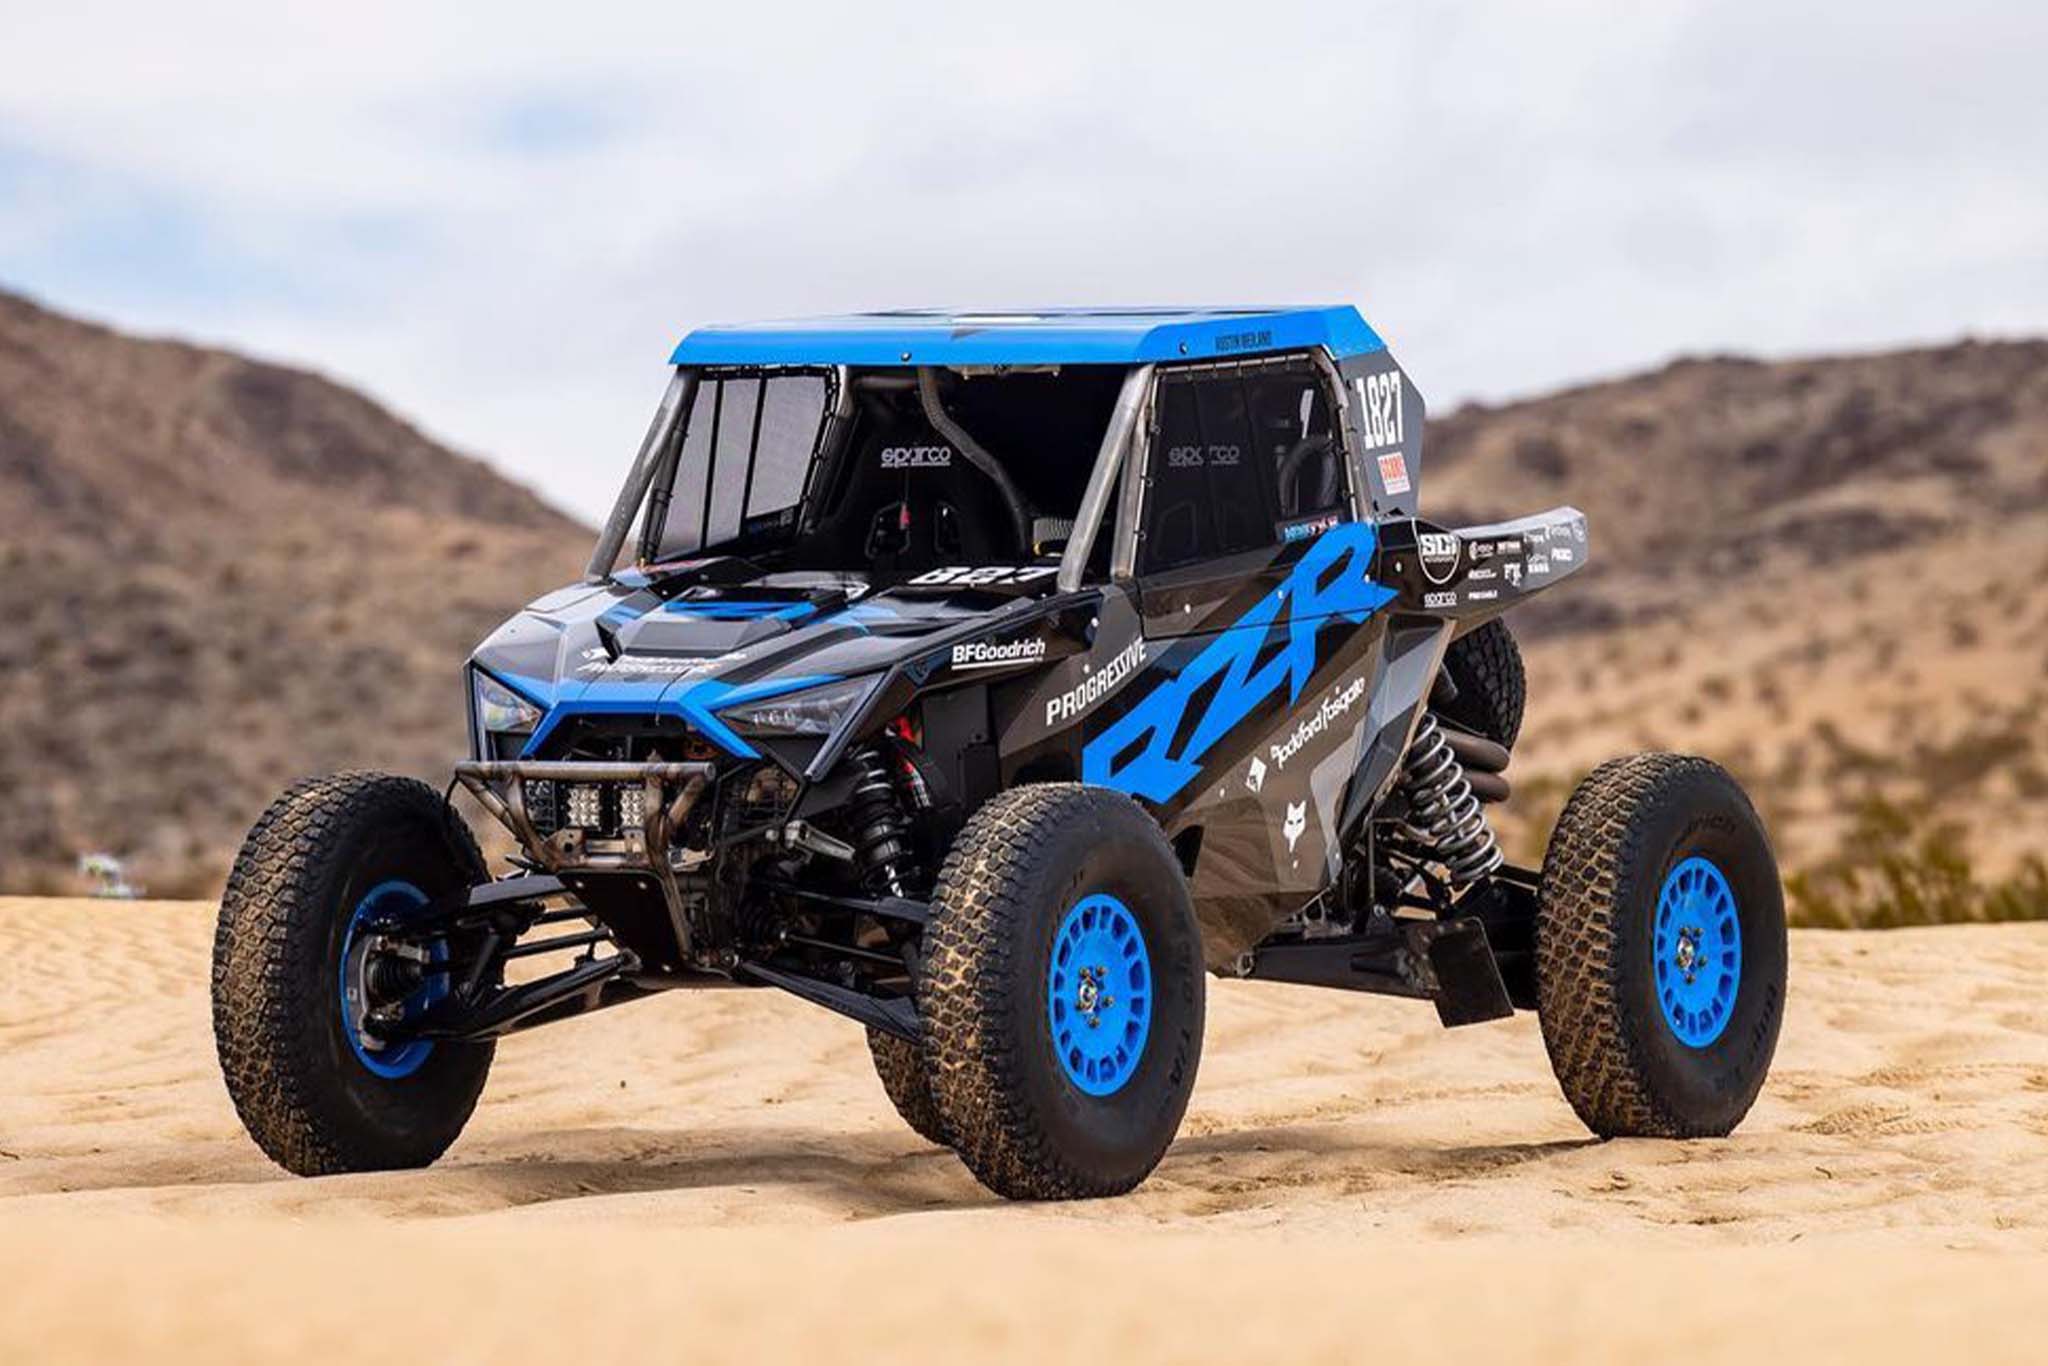 Polaris RZR Pro R Factory Racer Will Stomp Over Everything With 35-Inch Tires, 225 HP